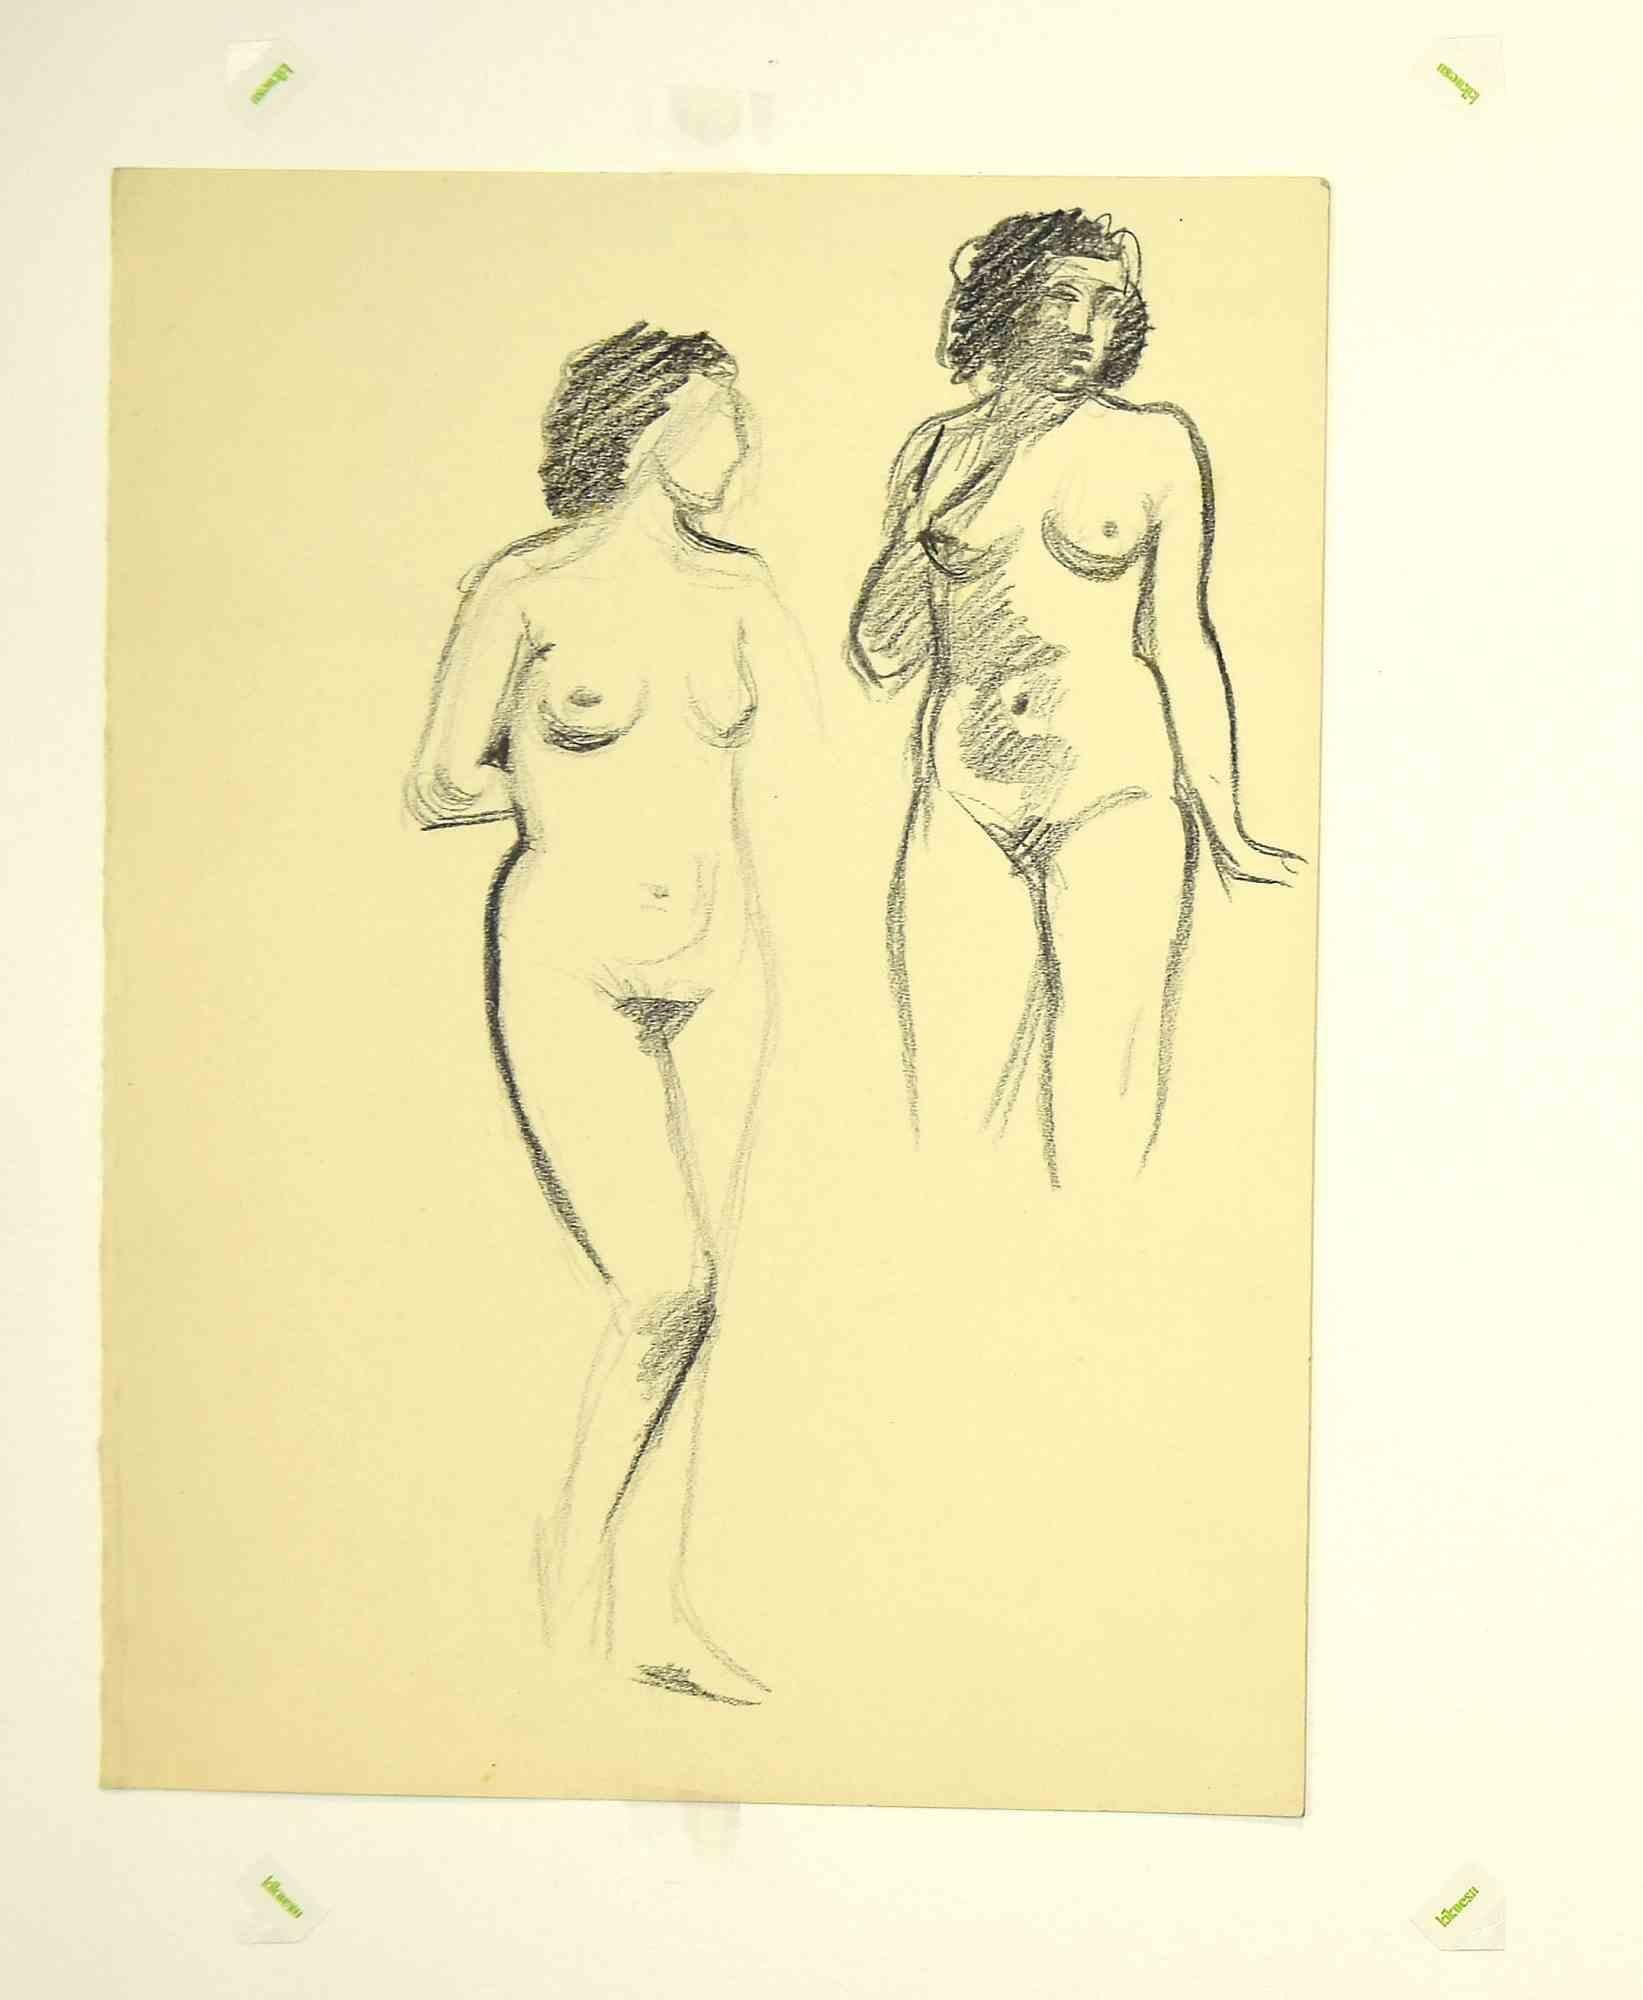 Nudes - Drawing by Leo Guida - 1980s